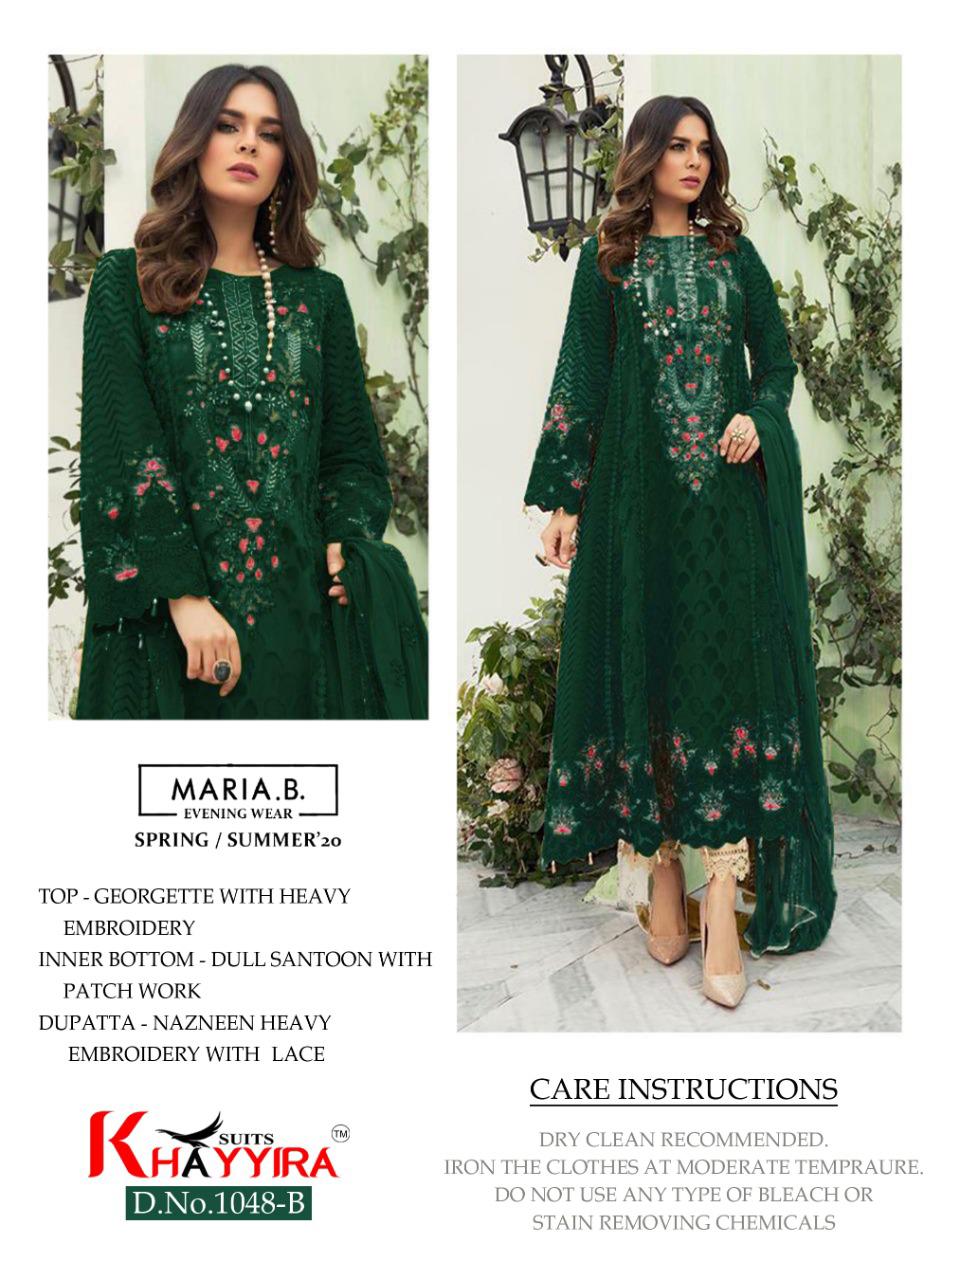 Khayyira Suits Maria B Spring Summer 20 Georgette With Heavy...